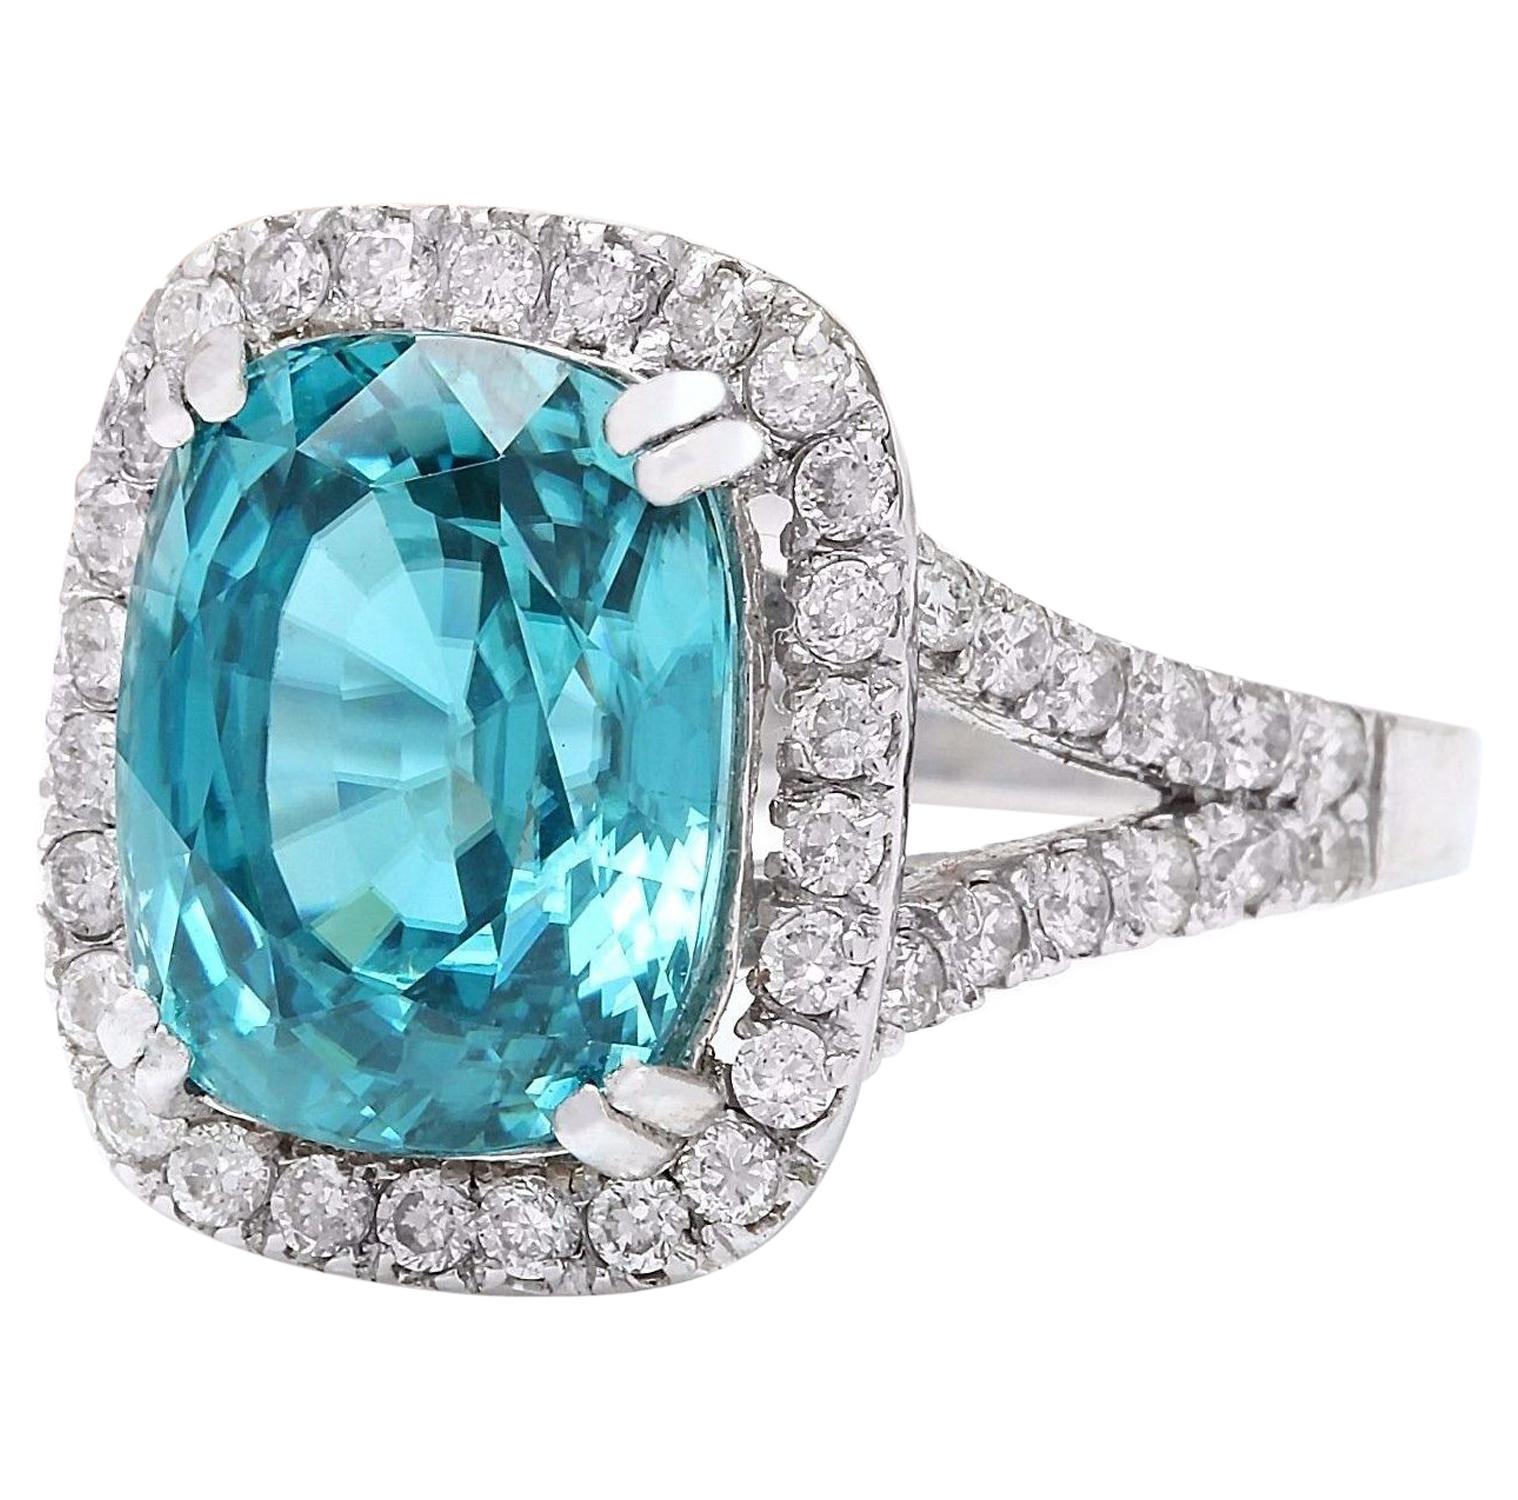 7.34 Carat Natural Zircon 14K Solid White Gold Diamond Ring
 Item Type: Ring
 Item Style: Cocktail
 Material: 14K White Gold
 Mainstone: Zircon
 Stone Color: Blue
 Stone Weight: 6.66 Carat
 Stone Shape: Oval
 Stone Quantity: 1
 Stone Dimensions: